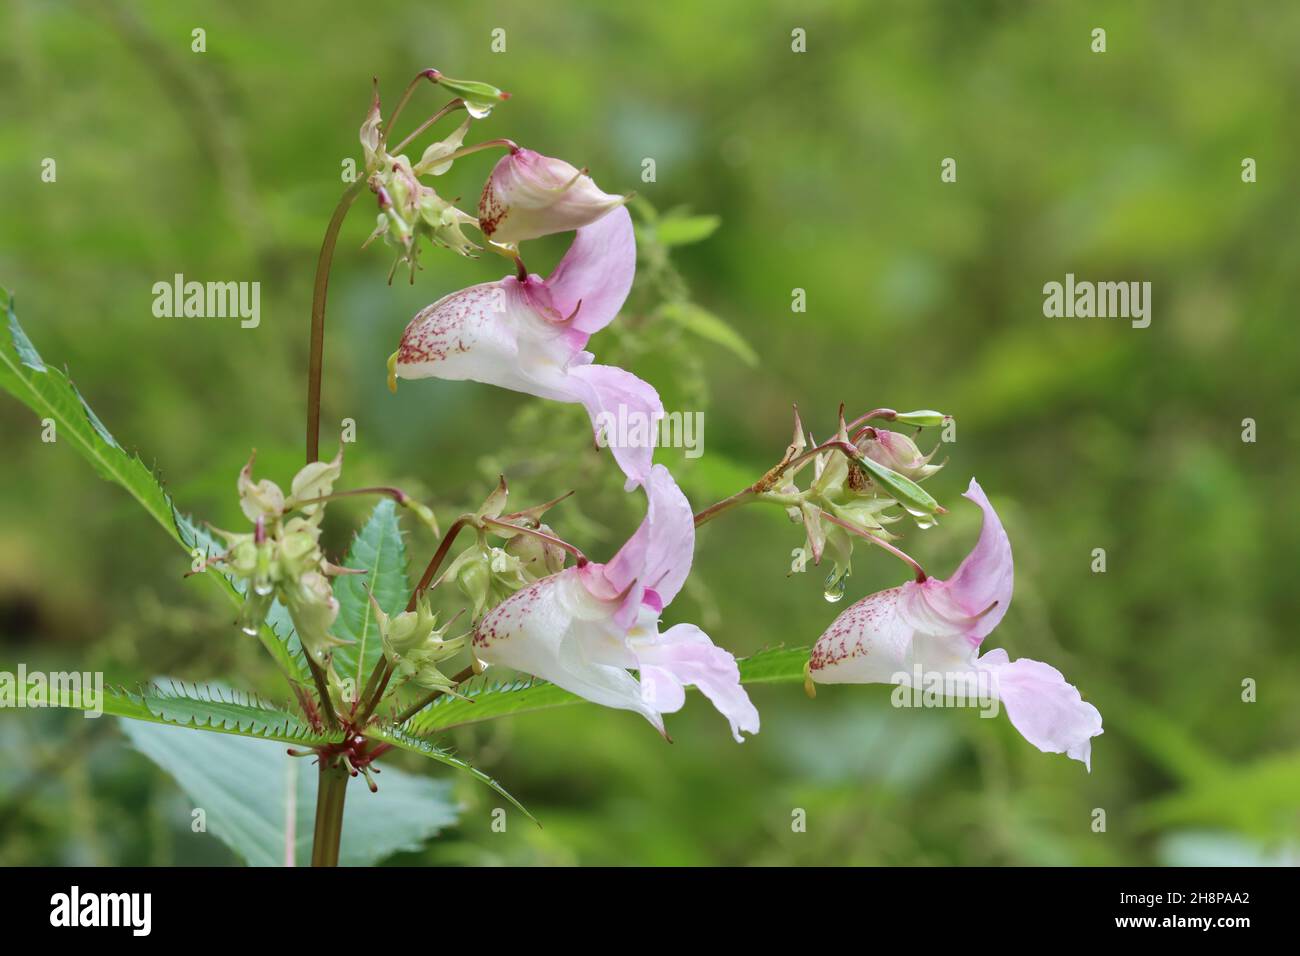 close-up of the delicate pink flowers of Impatiens glandulifera against a green blurred background Stock Photo